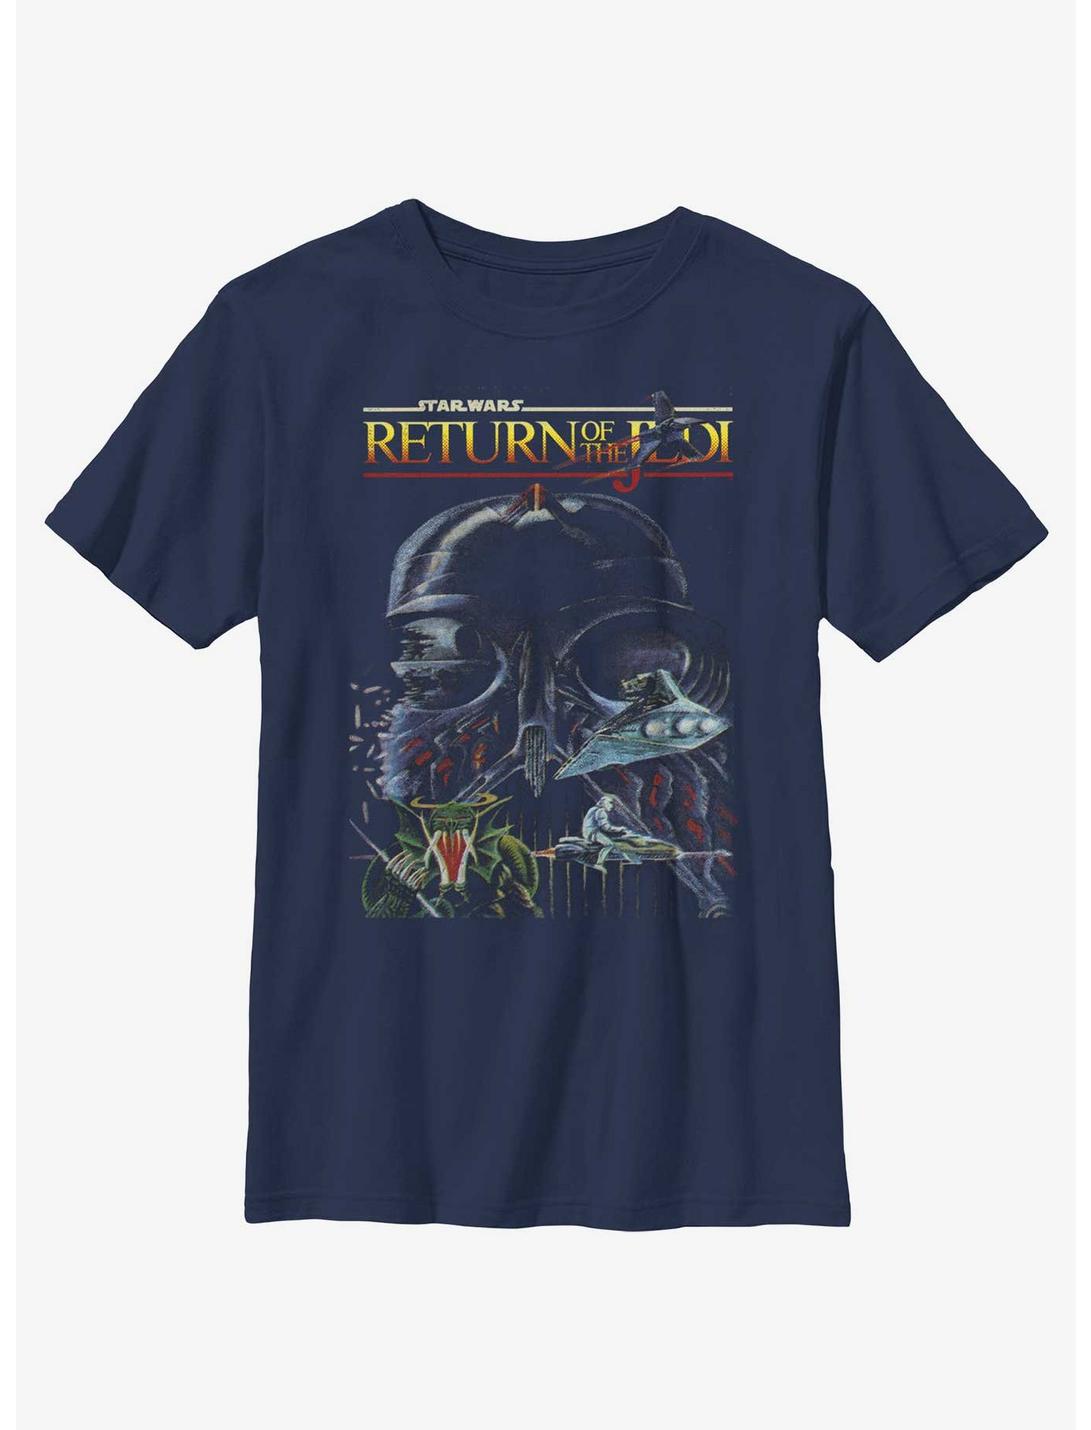 Star Wars Return Of The Jedi Concept Art Poster Youth T-Shirt, NAVY, hi-res